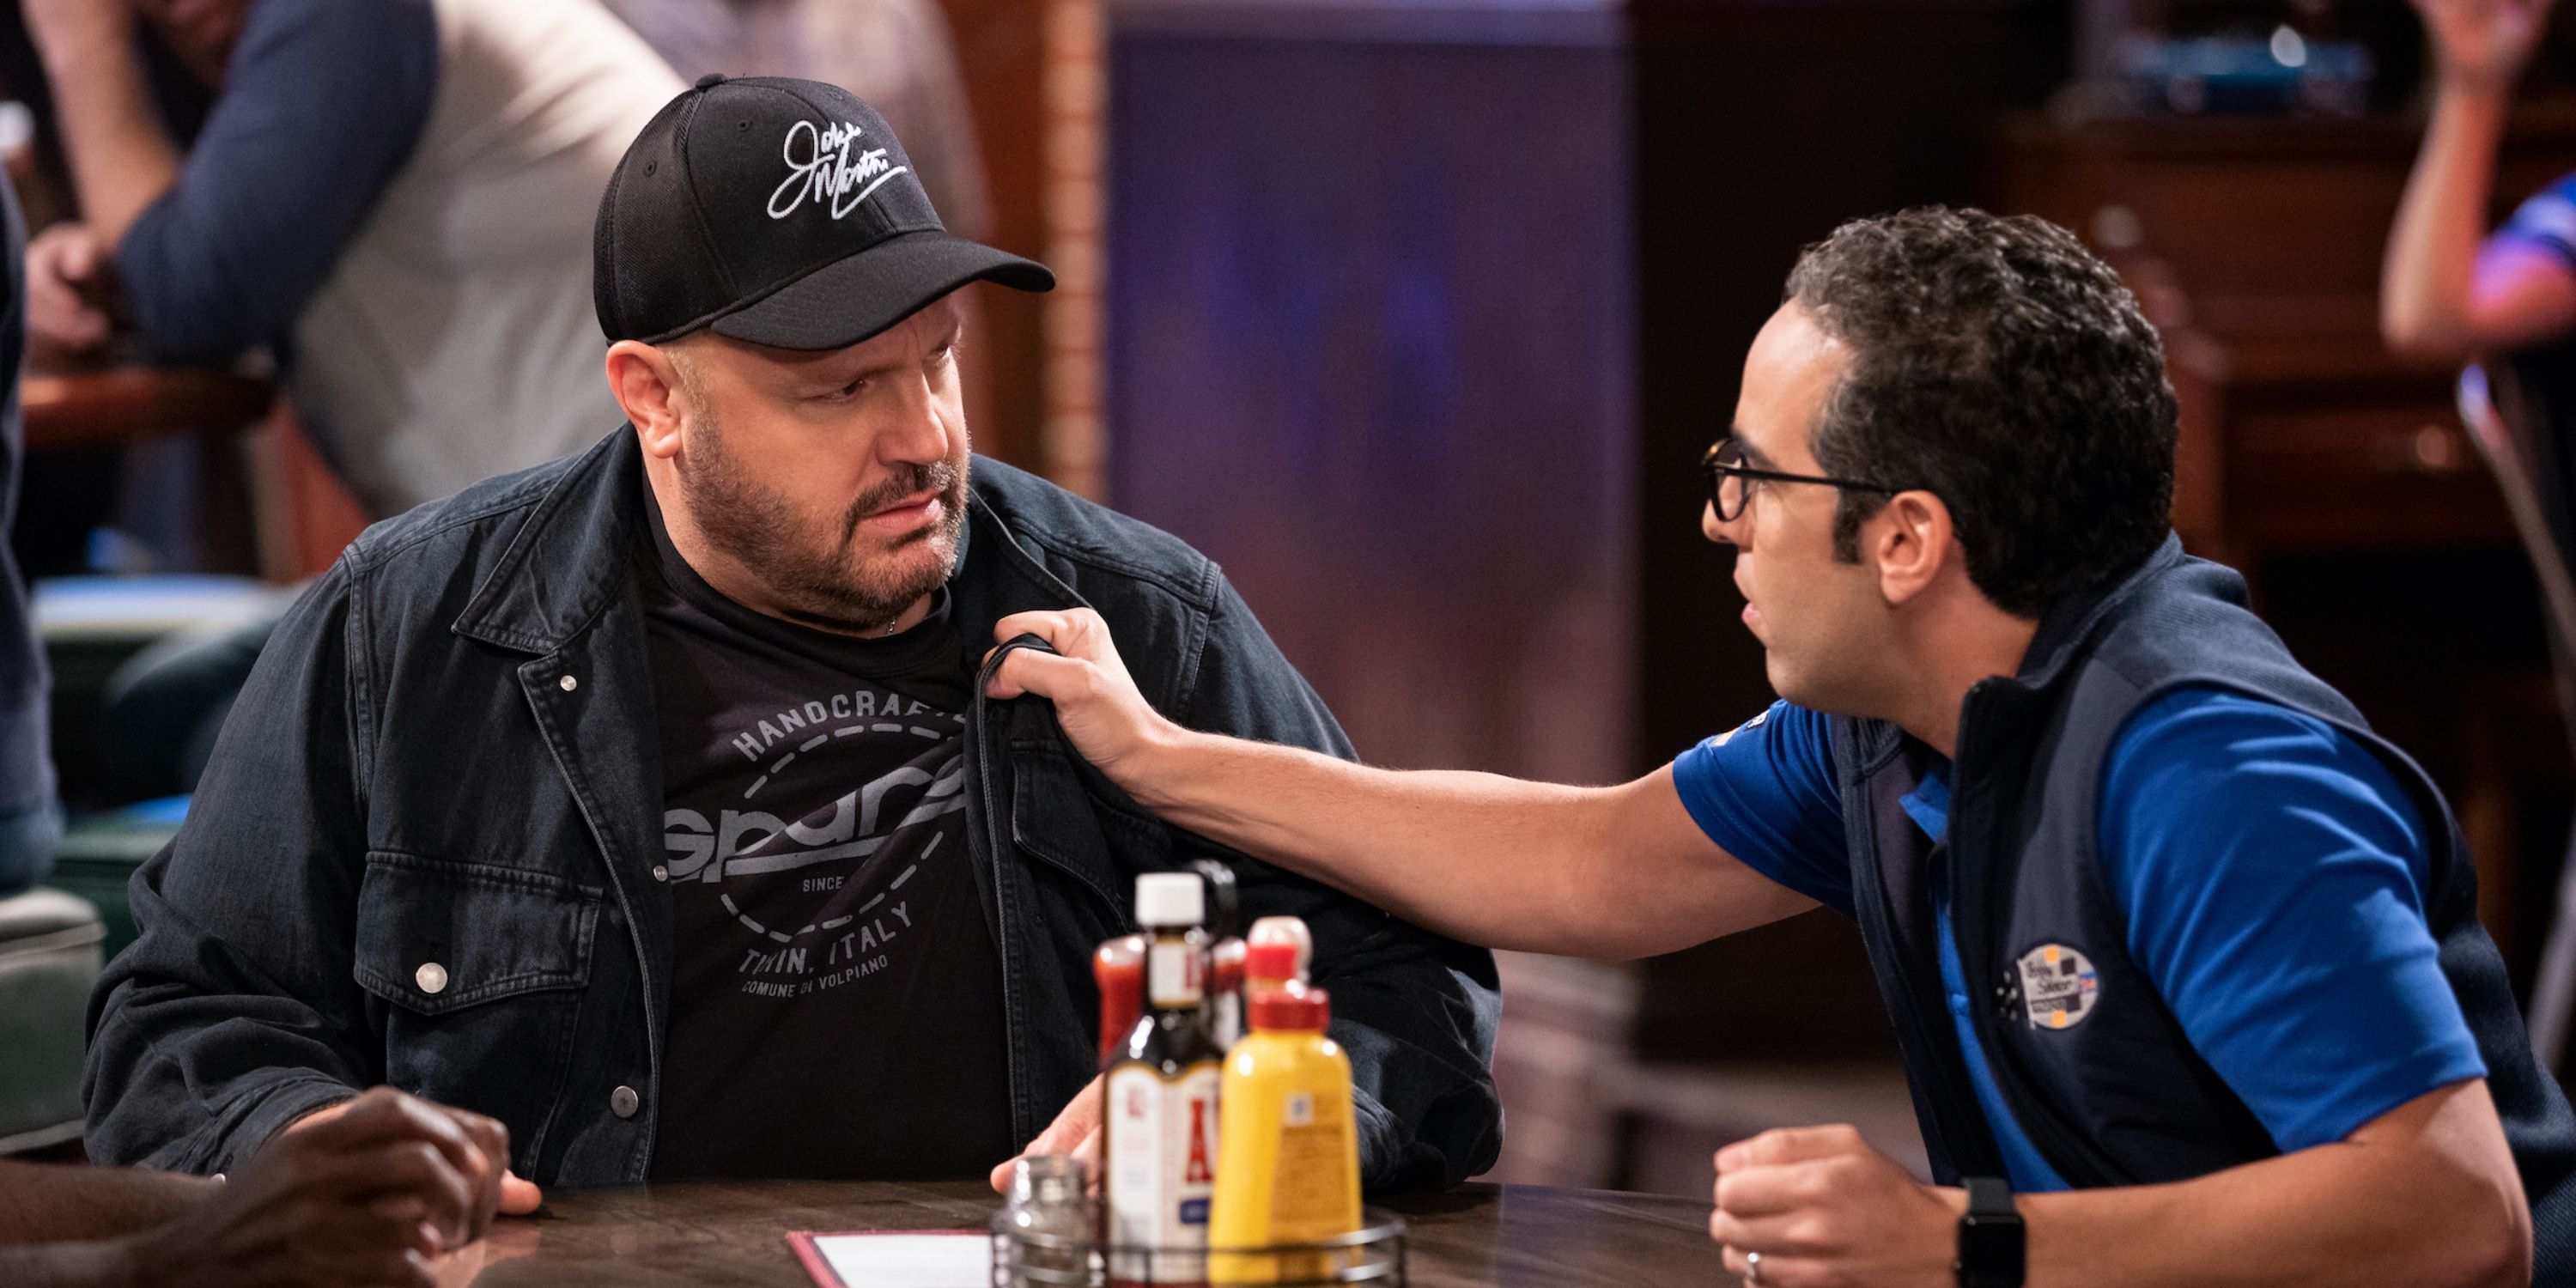 Kevin James and Dan Ahdoot in The Crew on Netflix